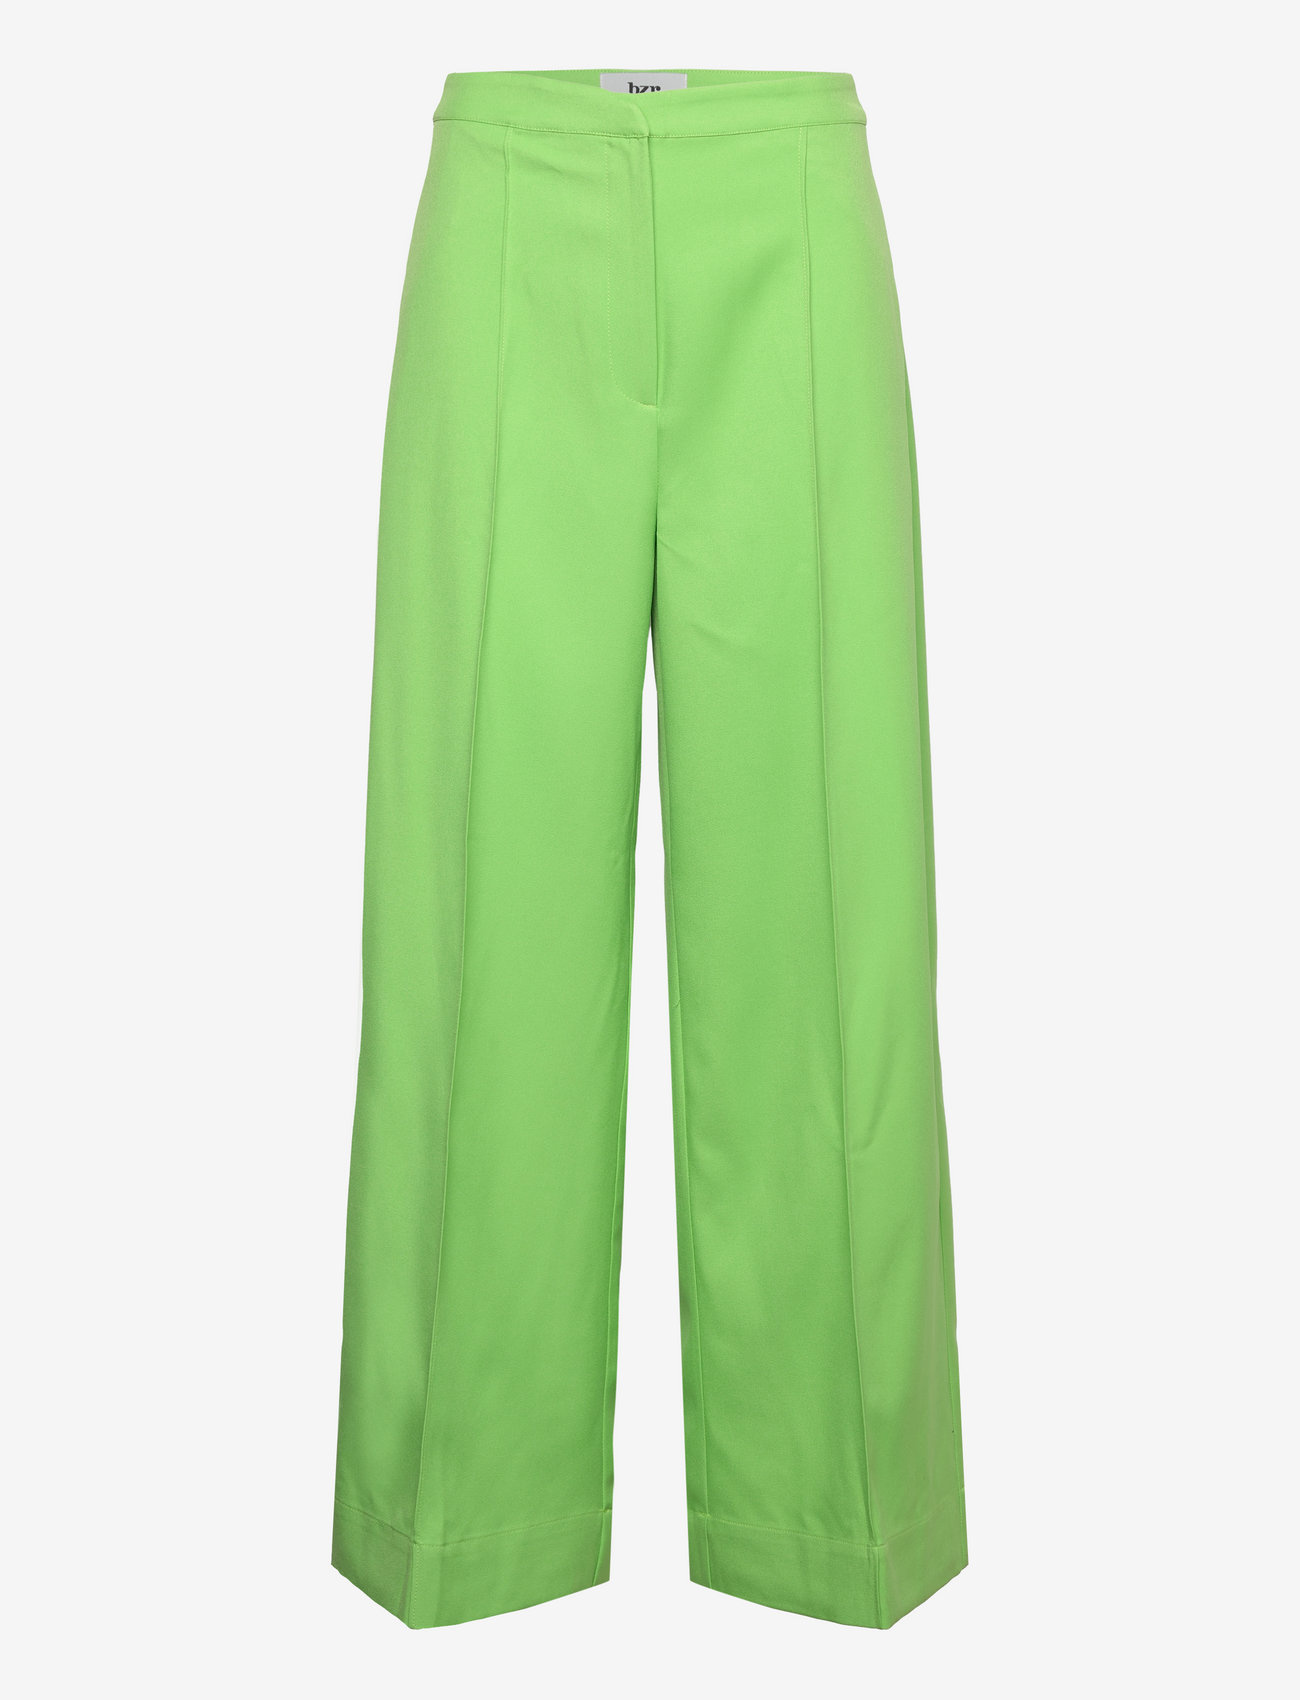 bzr - VibeBZWilde pants - tailored trousers - lime - 0